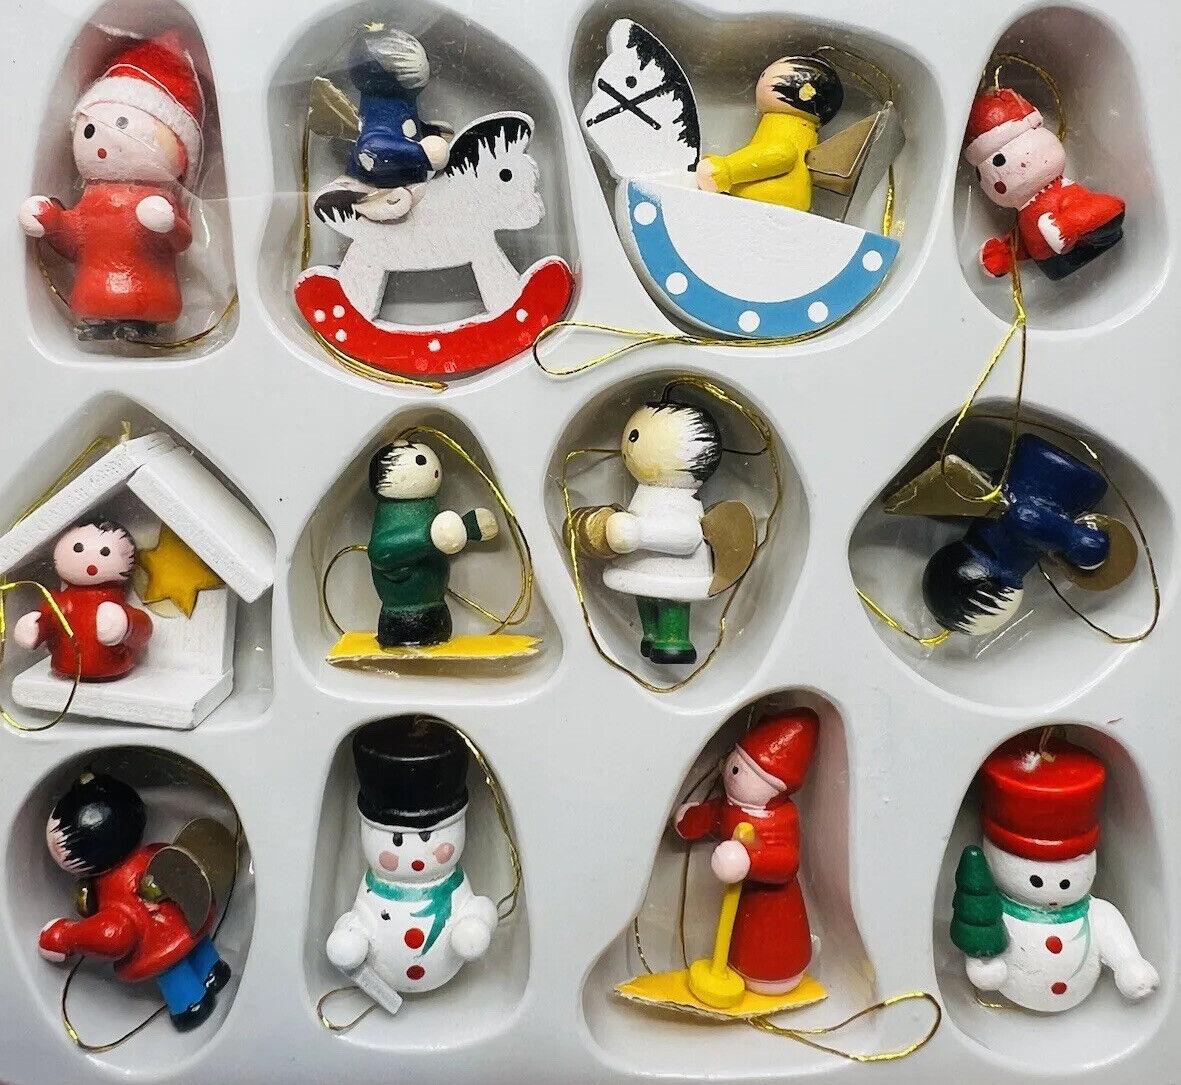 Vintage Lot of 12 Classic Mini Wooden Xmas Tree Ornaments Hand Painted Holiday